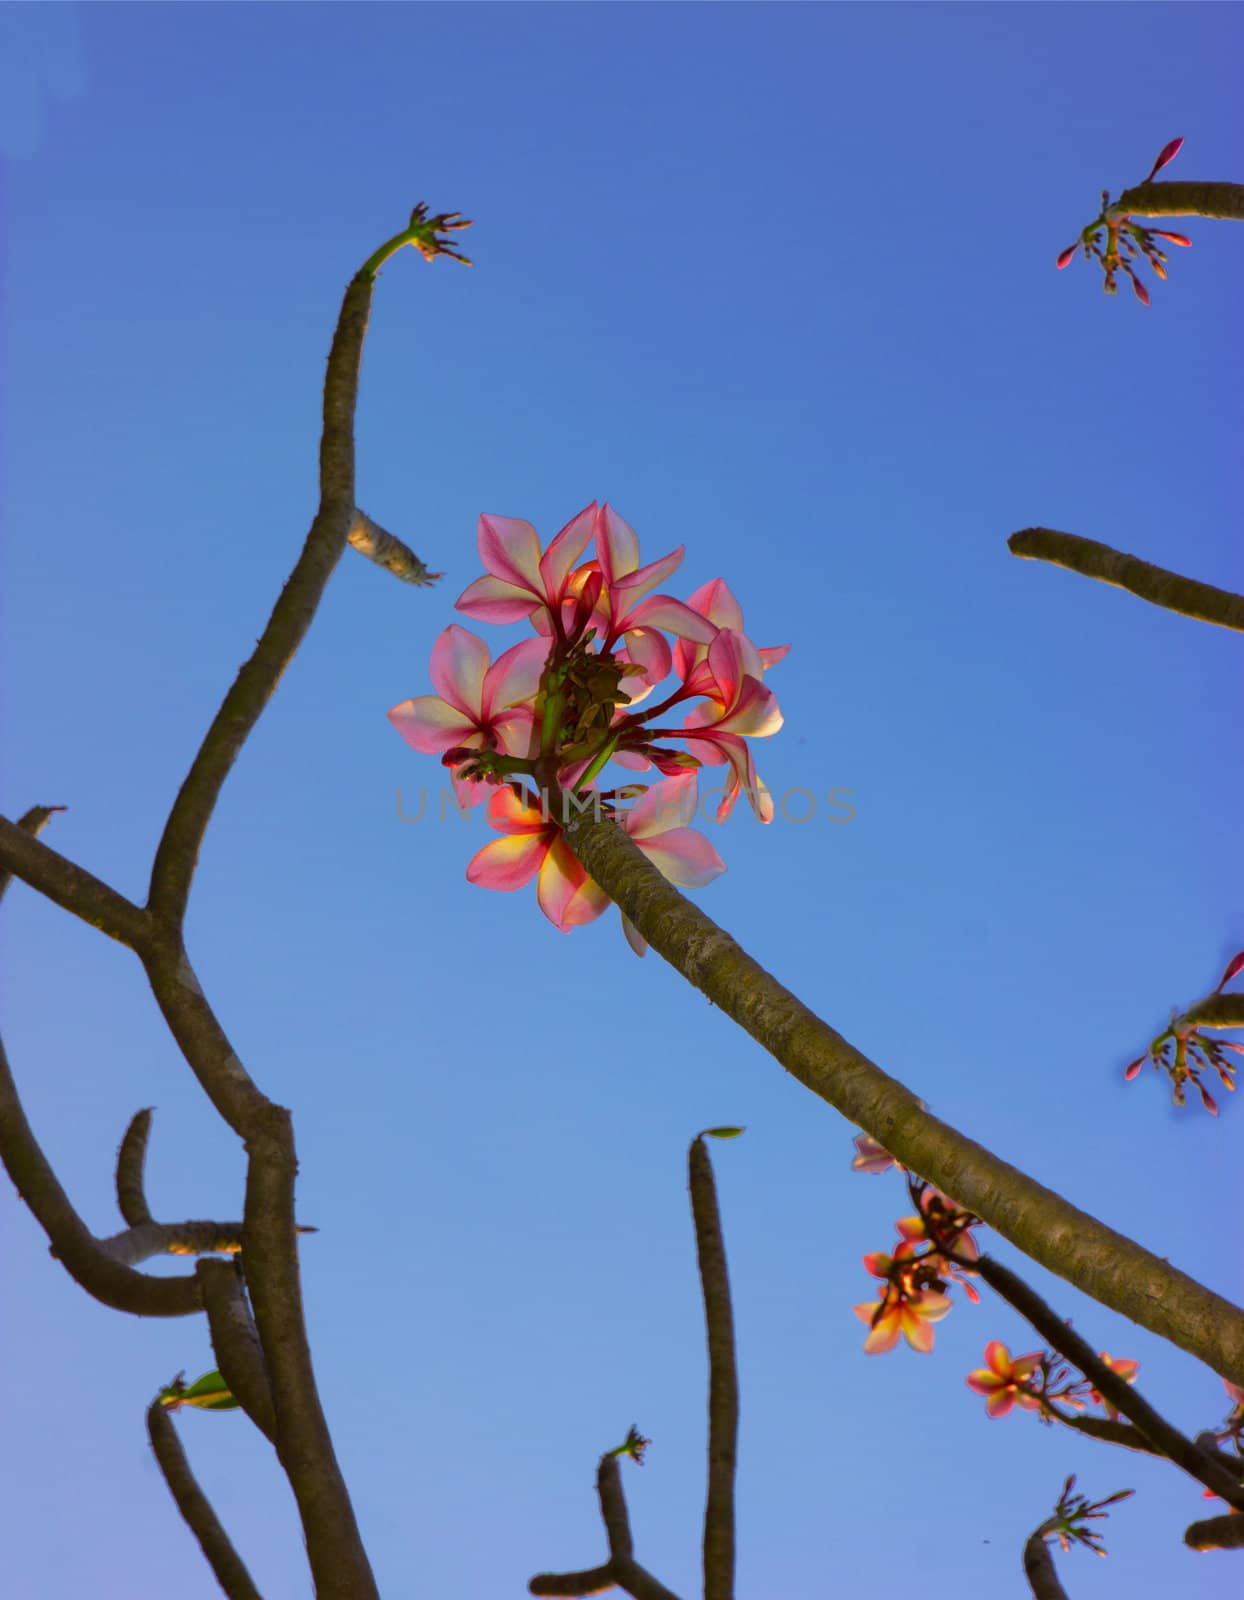 the beautiful flowers and flowering branches on the sky.